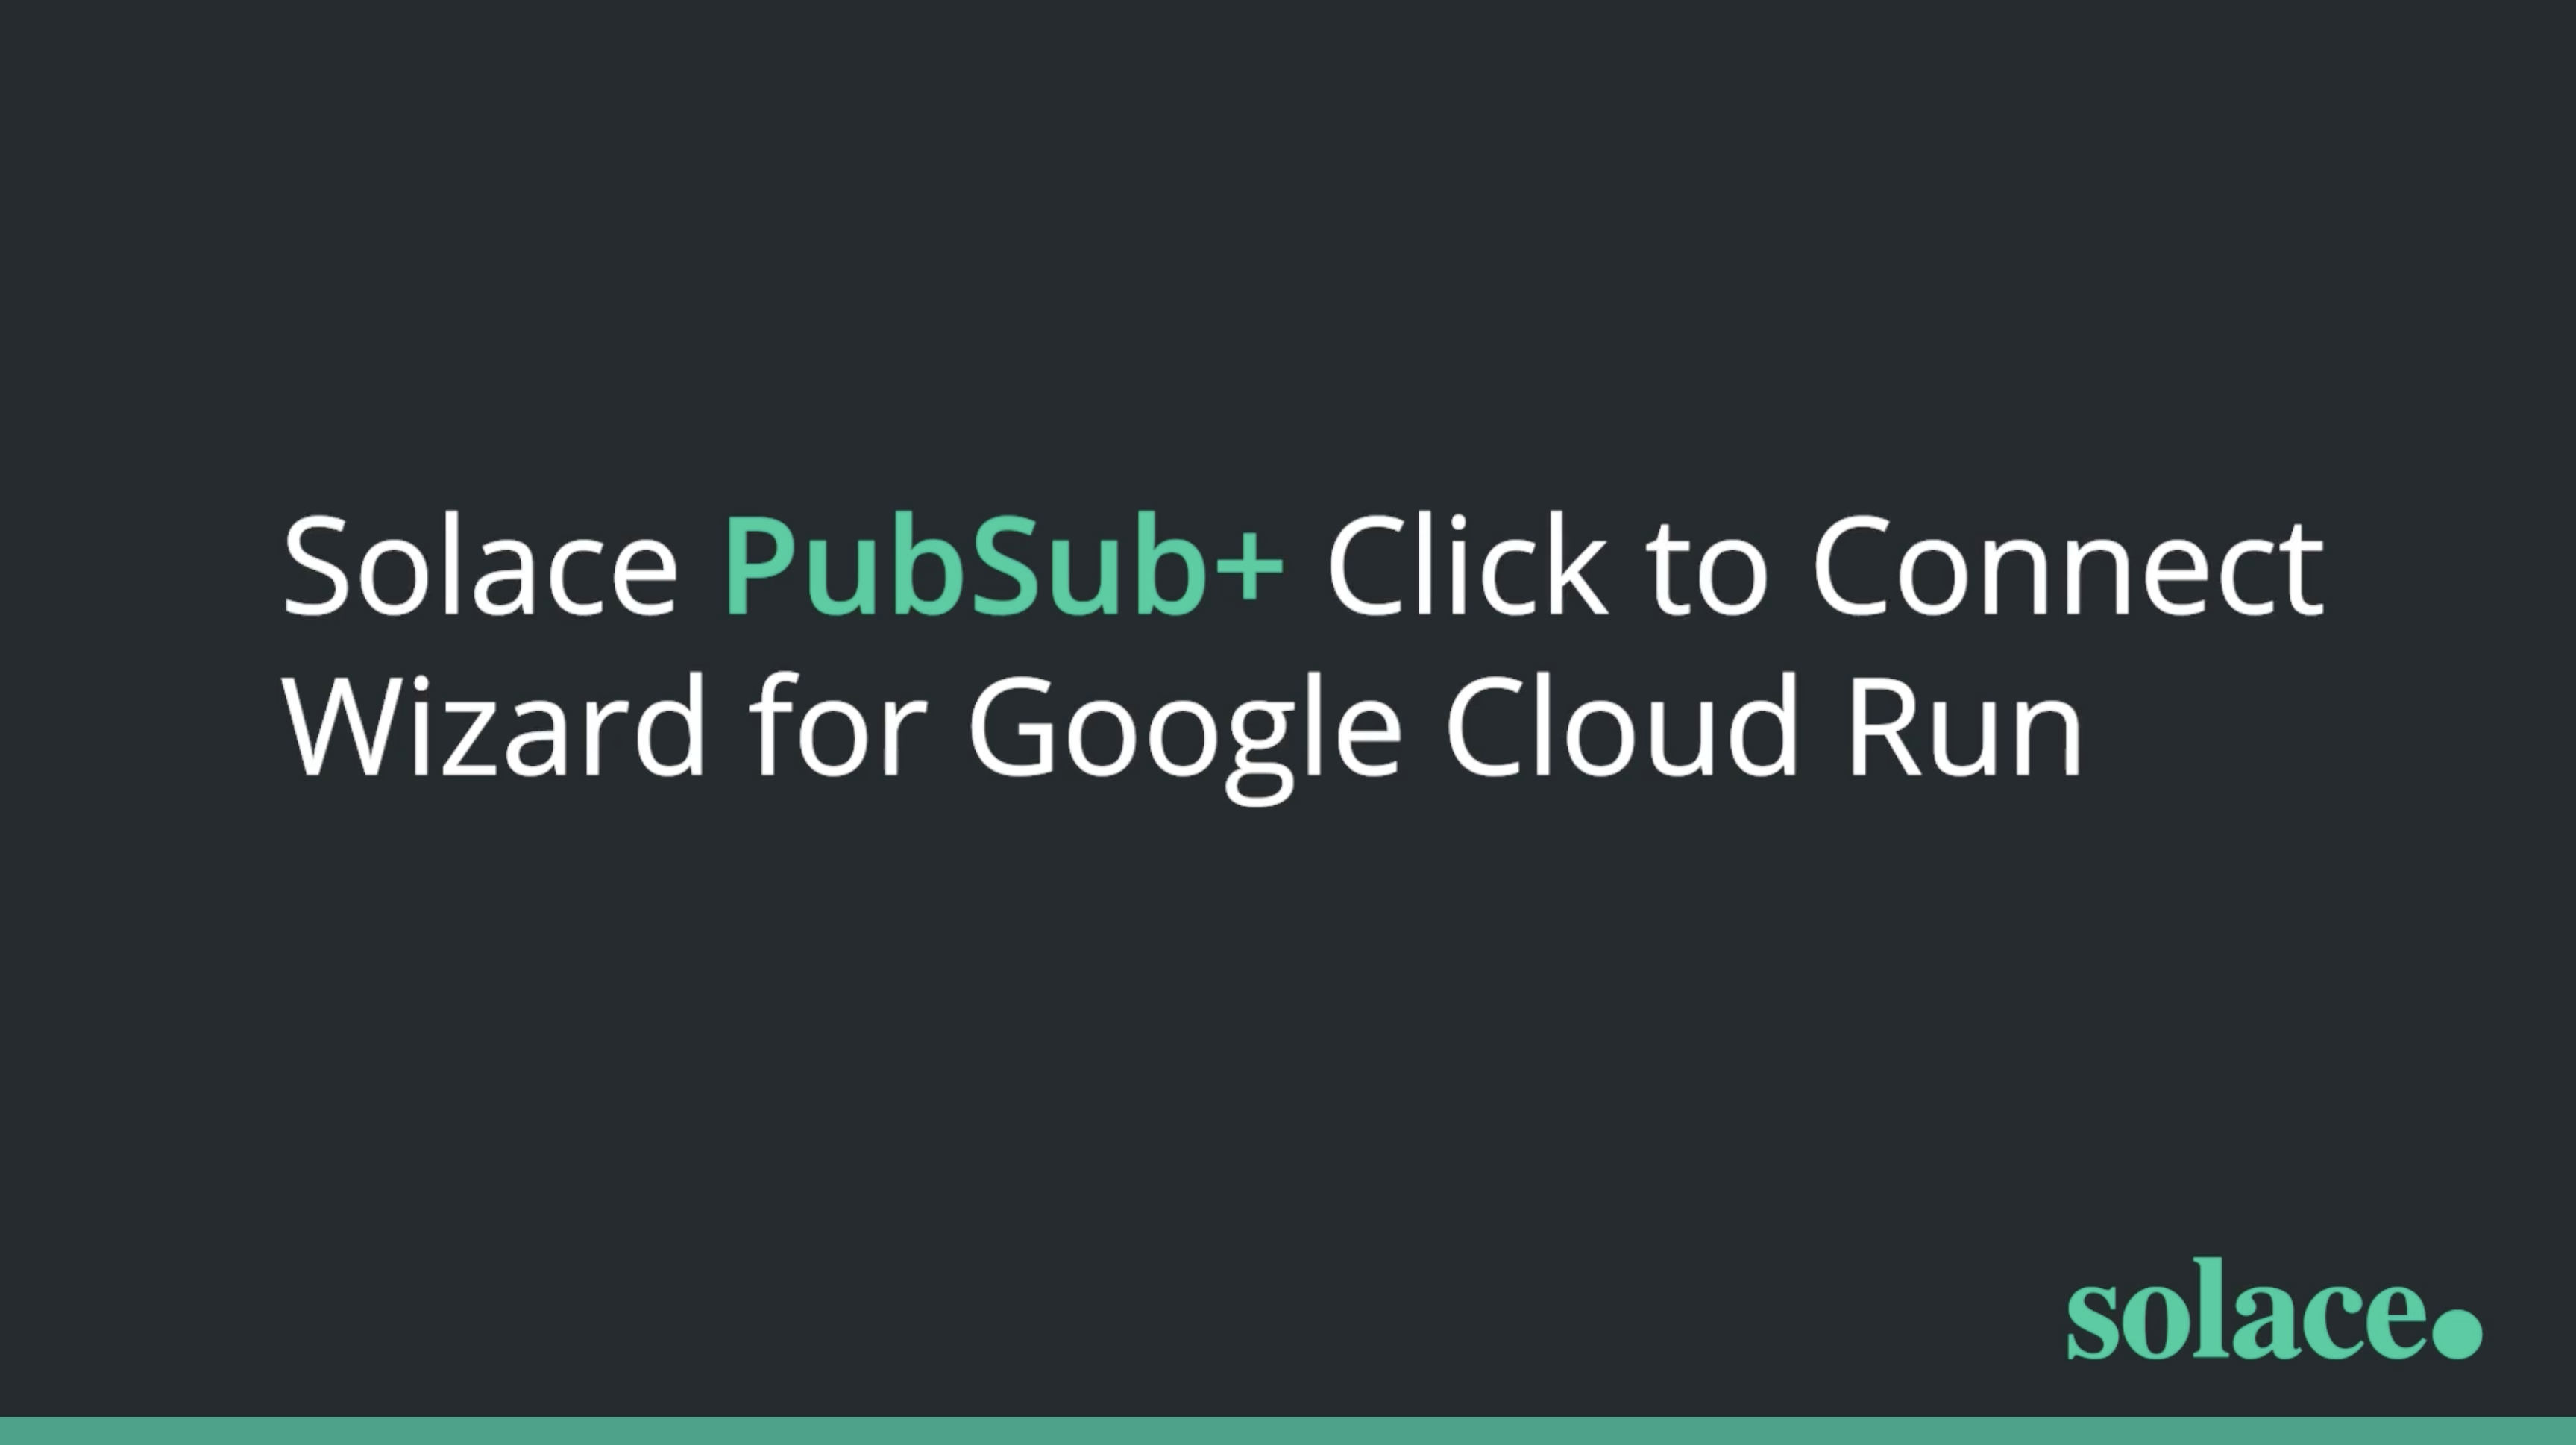 How to Connect PubSub+ to Google Cloud Run